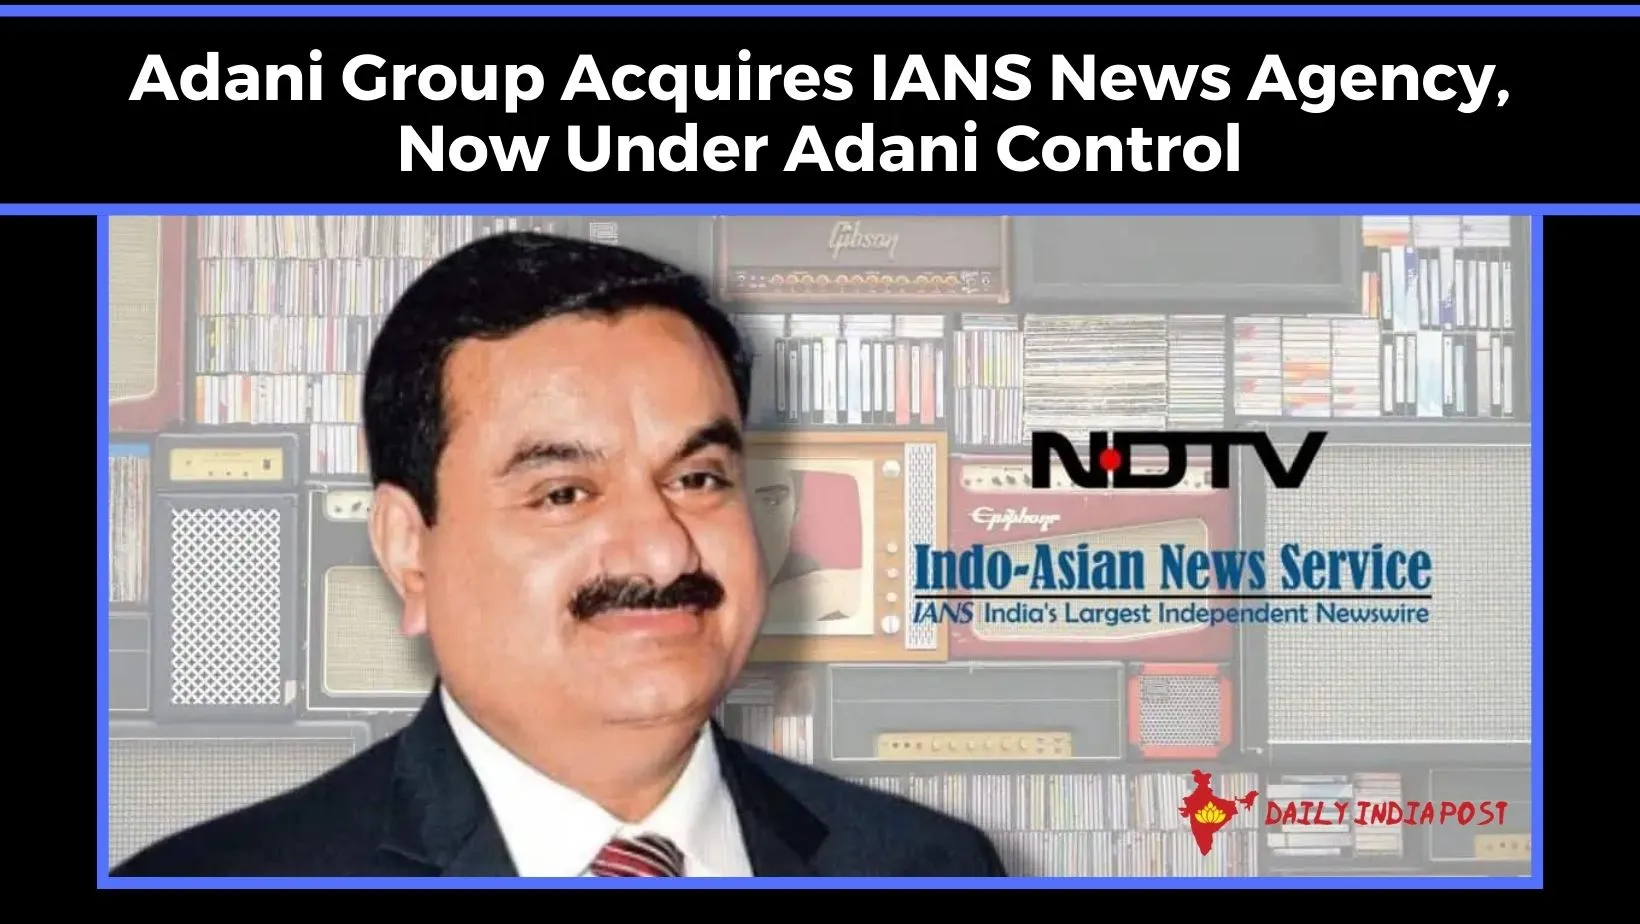 Adani Group Acquires IANS News Agency, Now Under Adani Control - Daily India Post